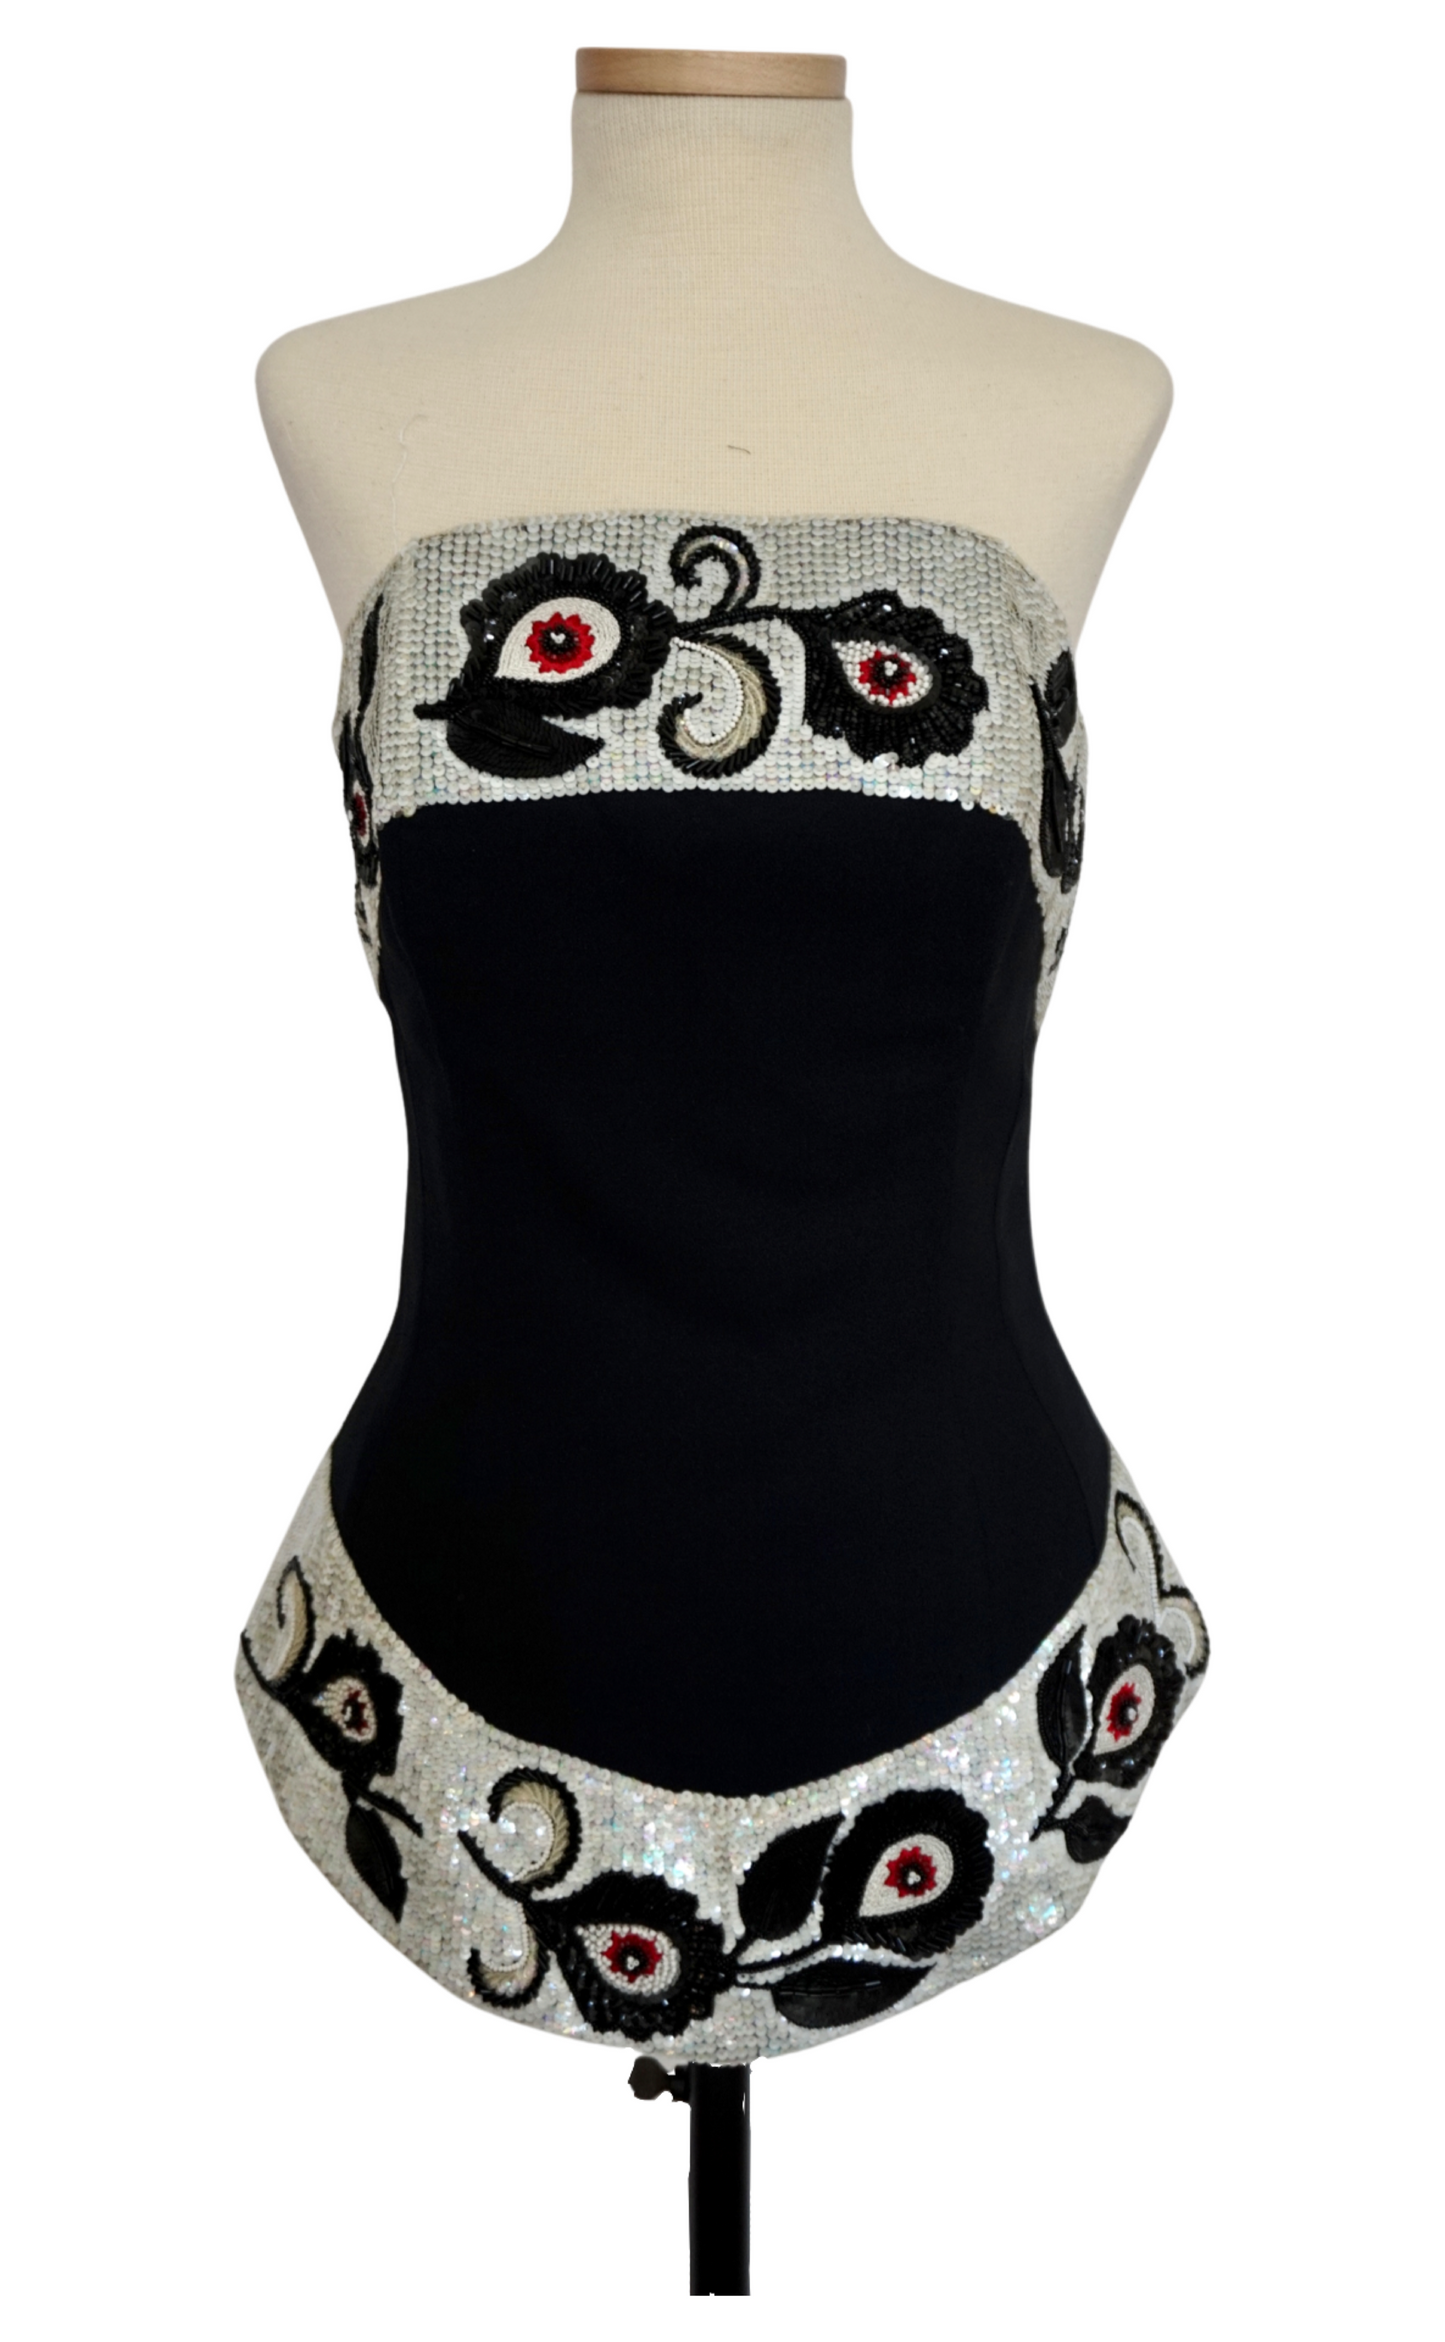 Karl Lagerfeld 1990's Black Corset Top with Sequin Embellishment